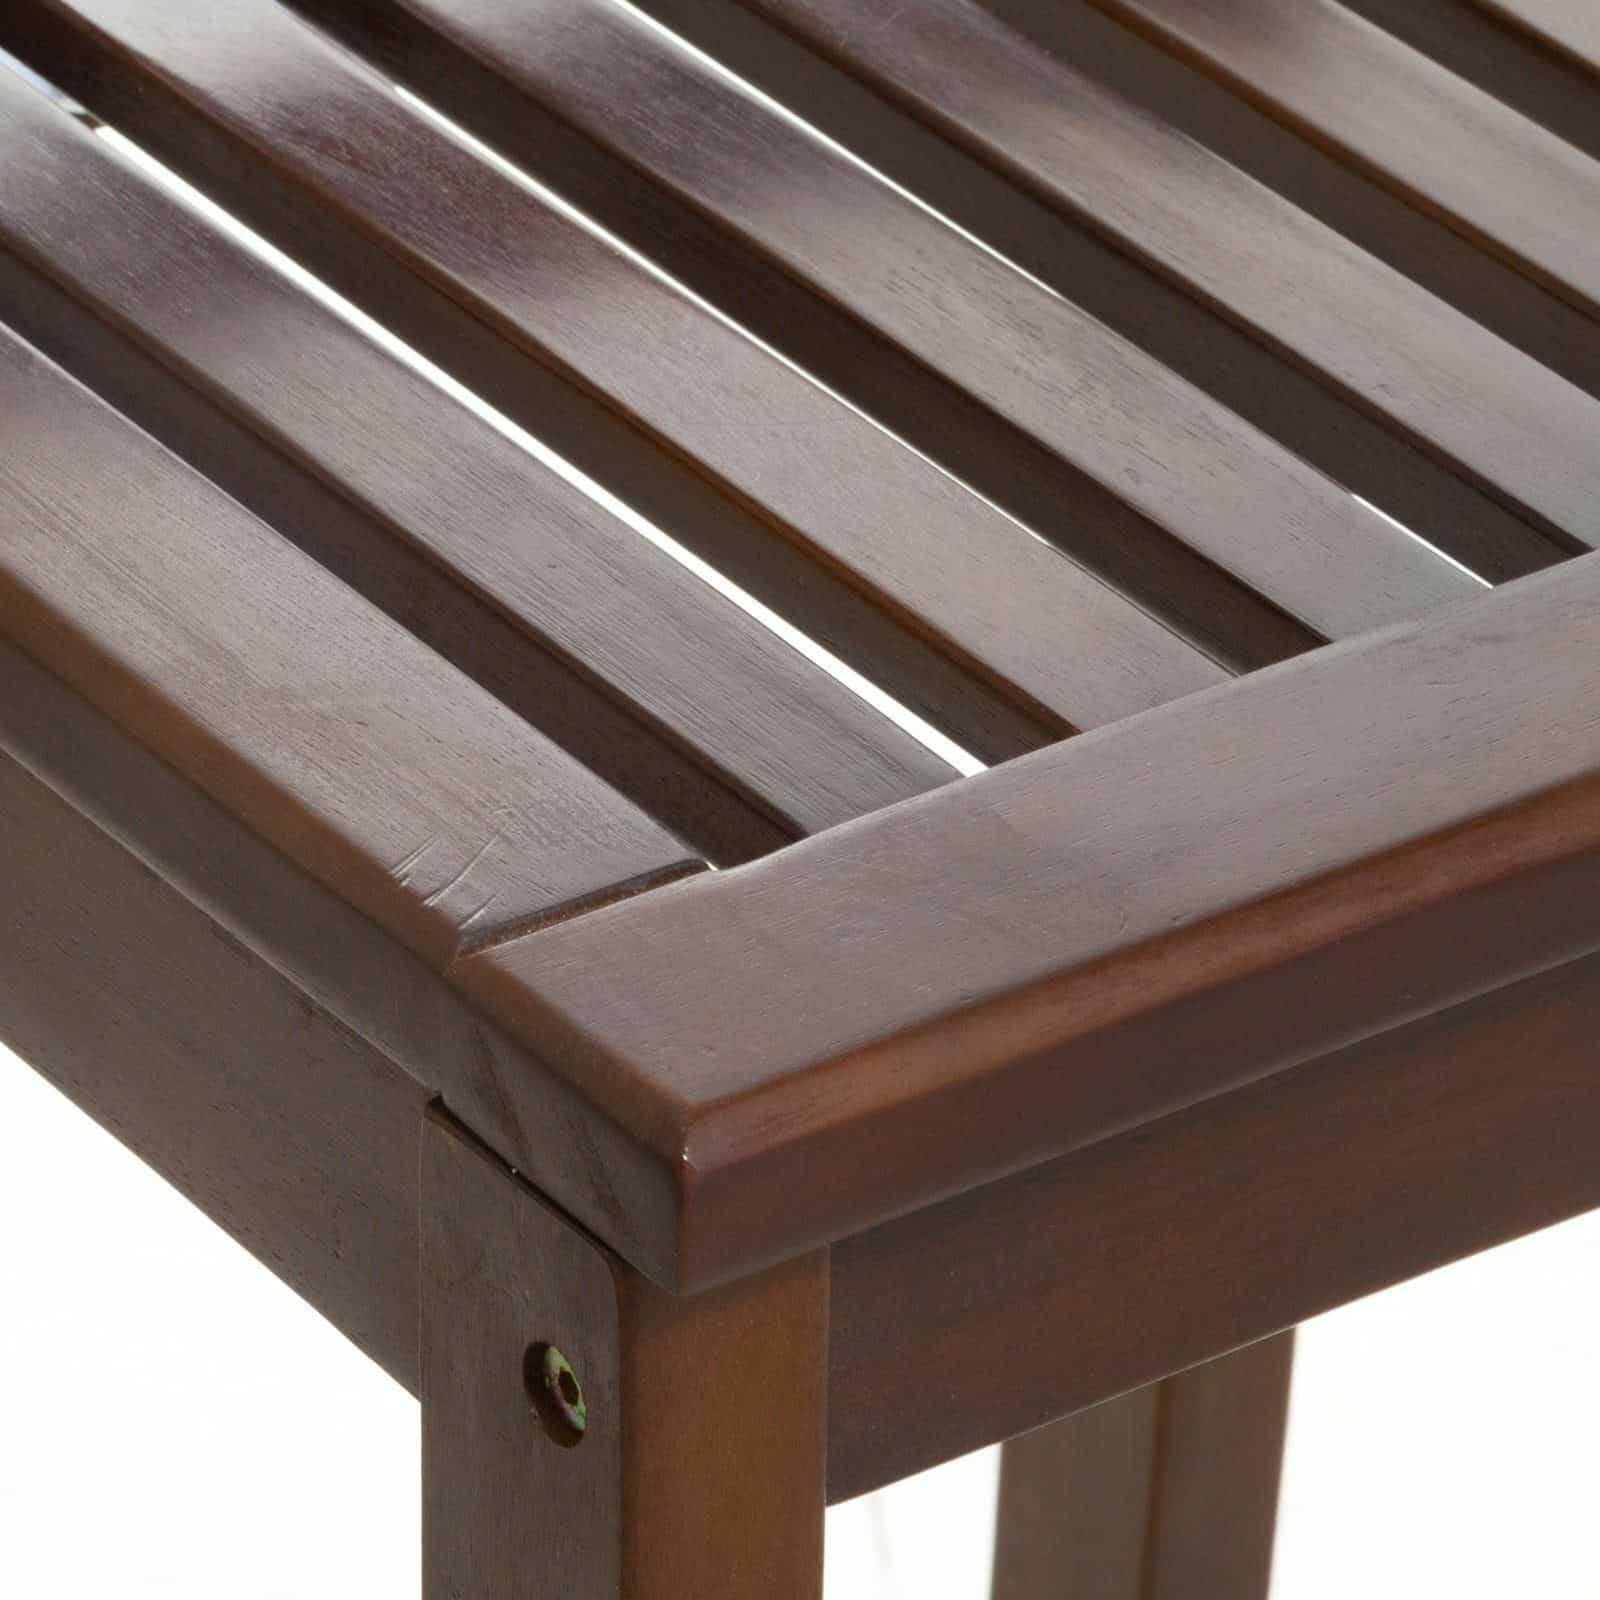 A close up of a wooden bench with slats.